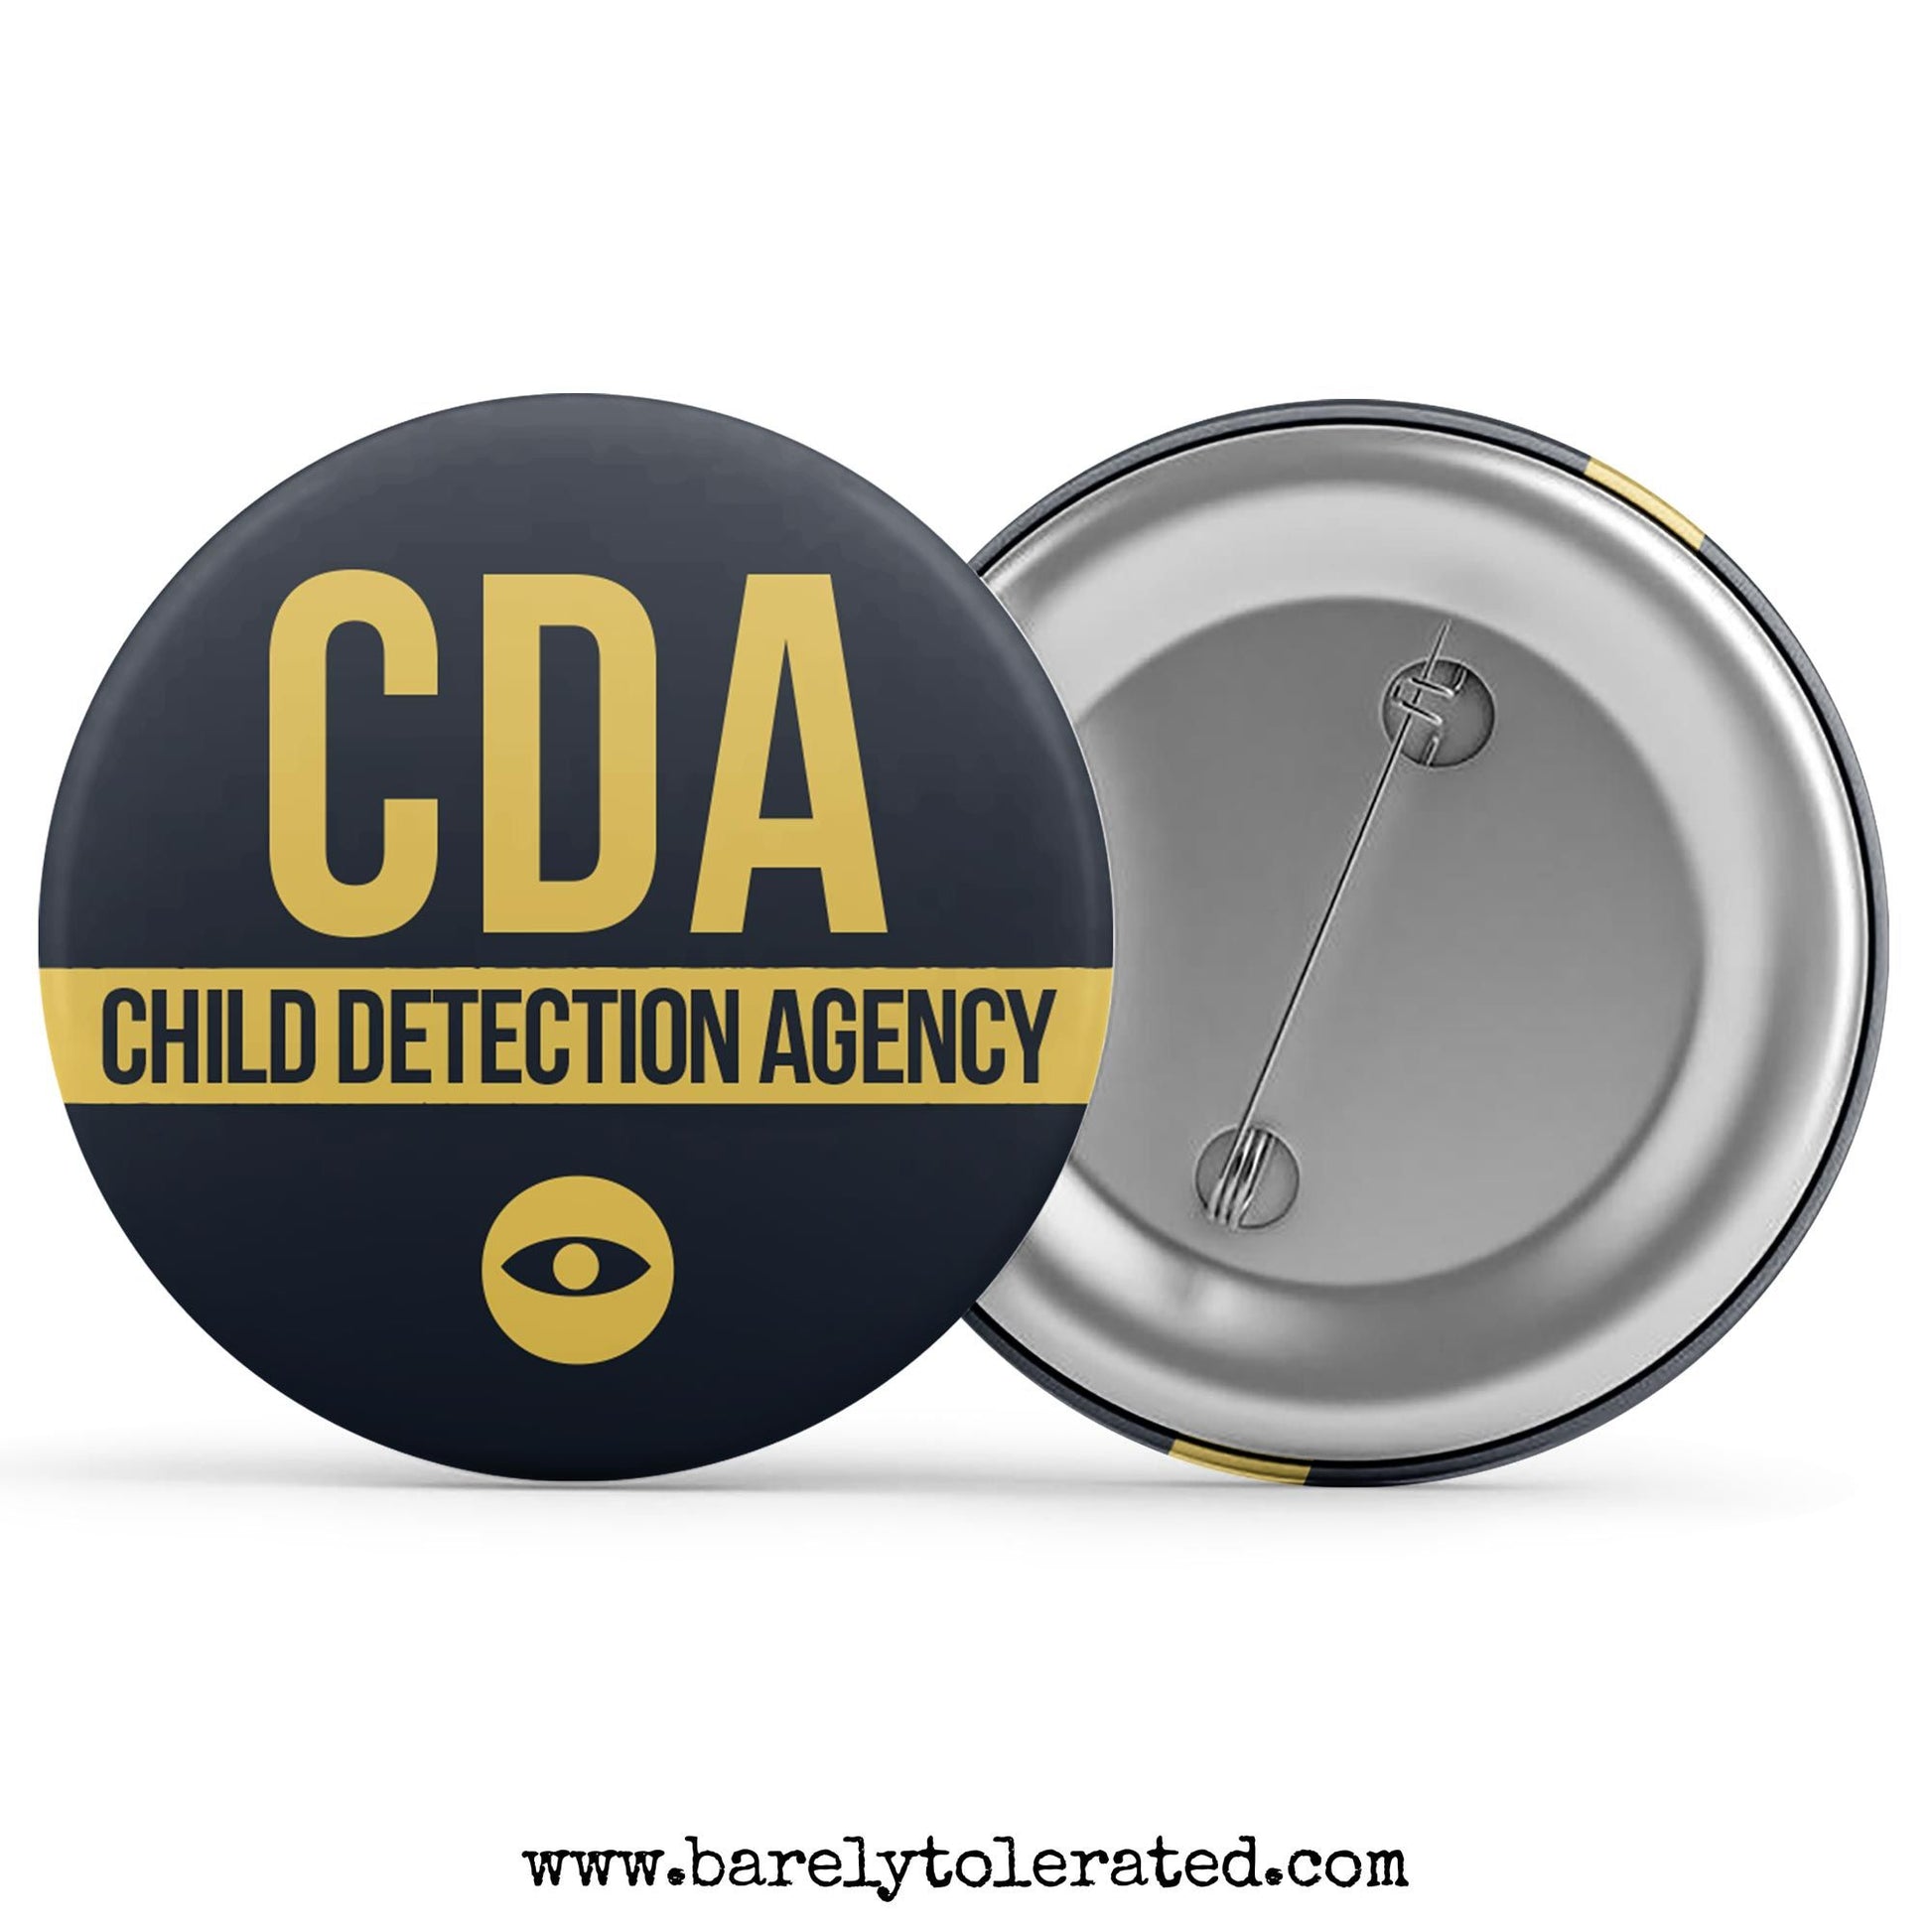 Child Detection Agency Image